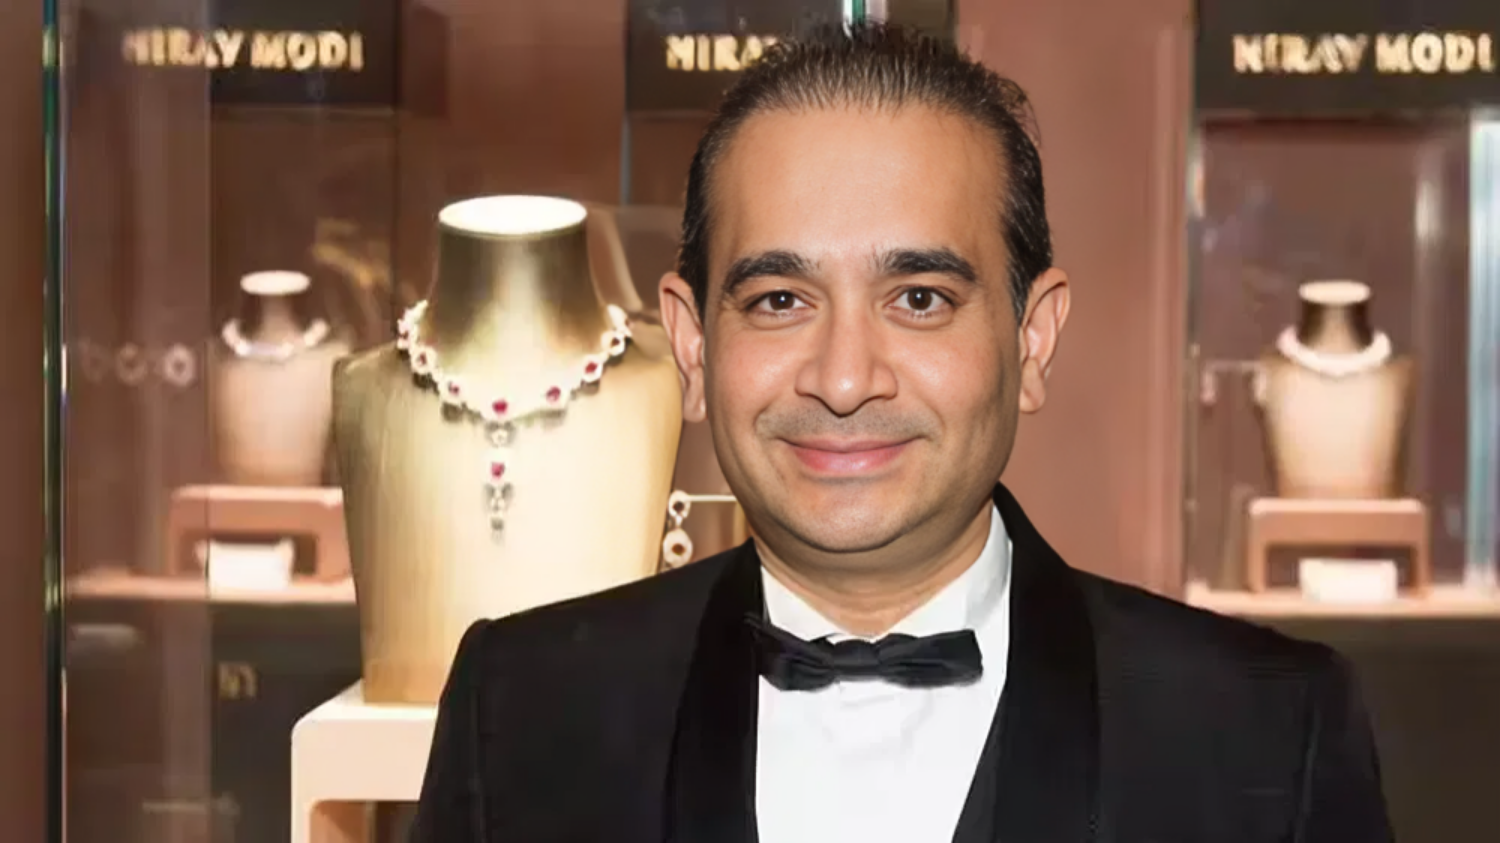 Picture of Fugitive Nirav Modi's palatial bungalow in London to be sold, court also fixes minimum price